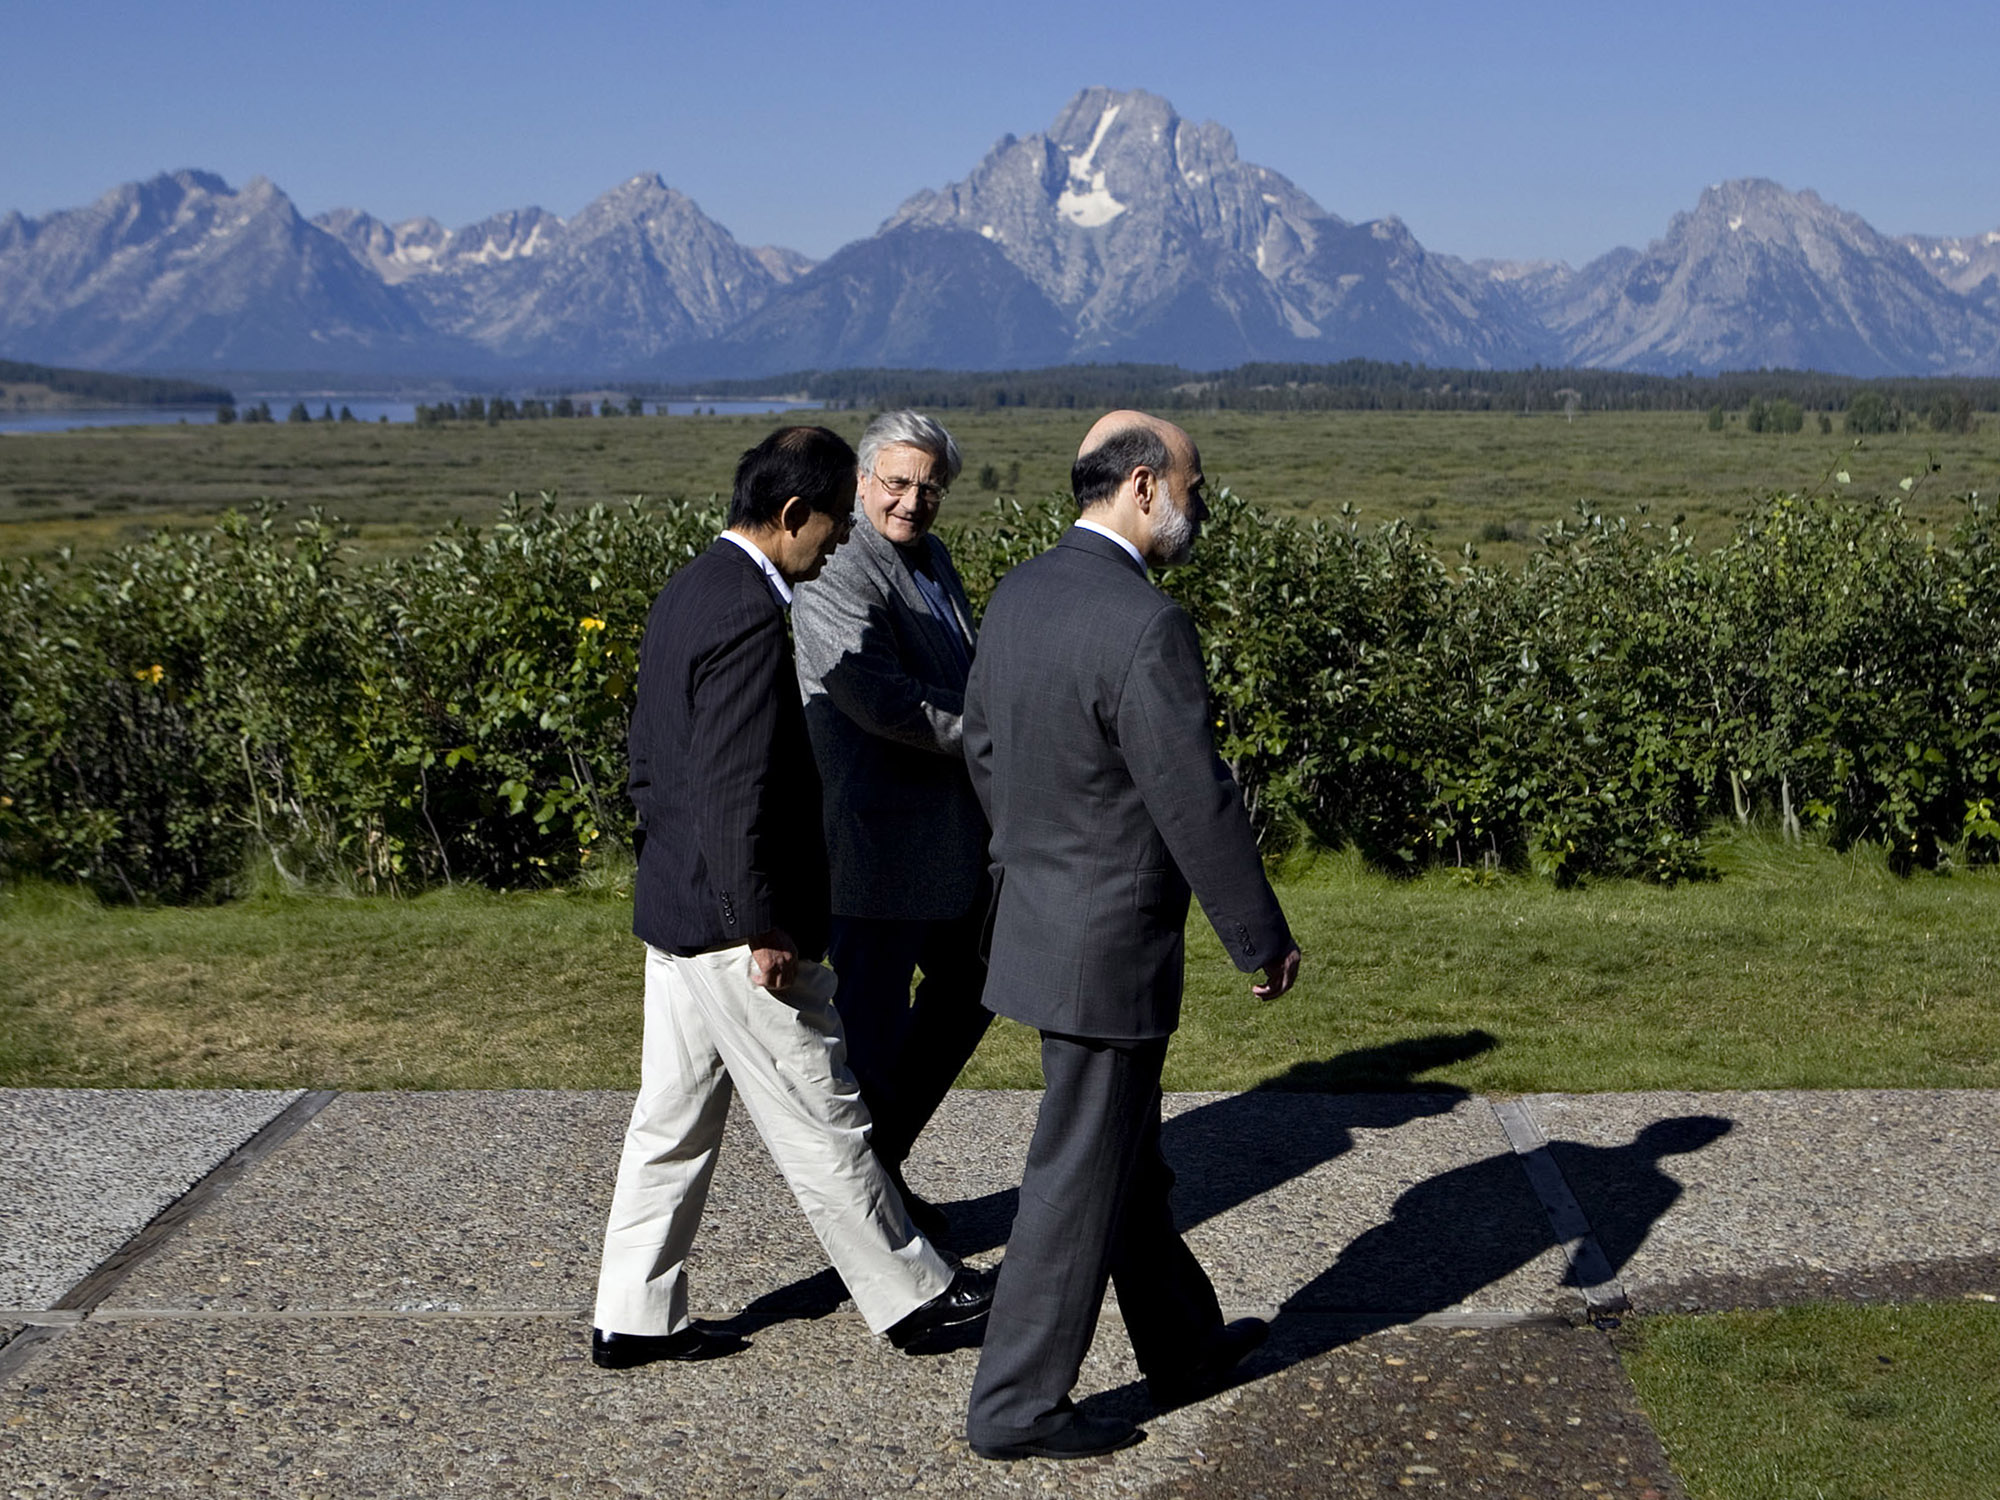 Ben S. Bernanke, right, walks with ECB President Jean-Claude Trichet, center, and Bank of Japan Governor Masaaki Shirakawa outside the Jackson Lake Lodge during a coffee break at the Jackson Hole Economic Symposium in Moran, Wyoming on Aug. 21, 2009.